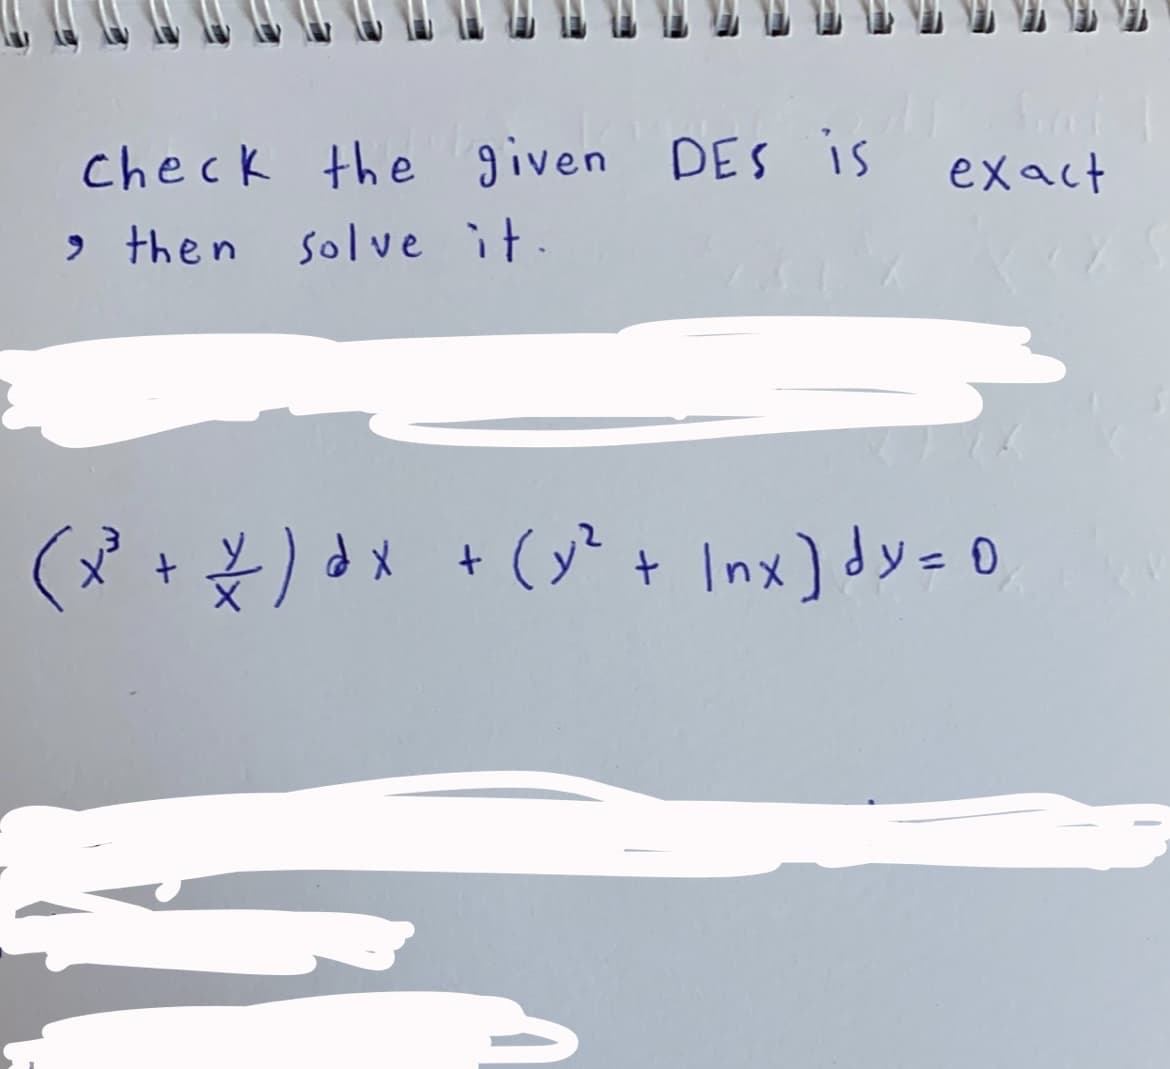 check the given DES is
exact
» then solve it.
(x + )dx + (y + Inx) dy= 0
